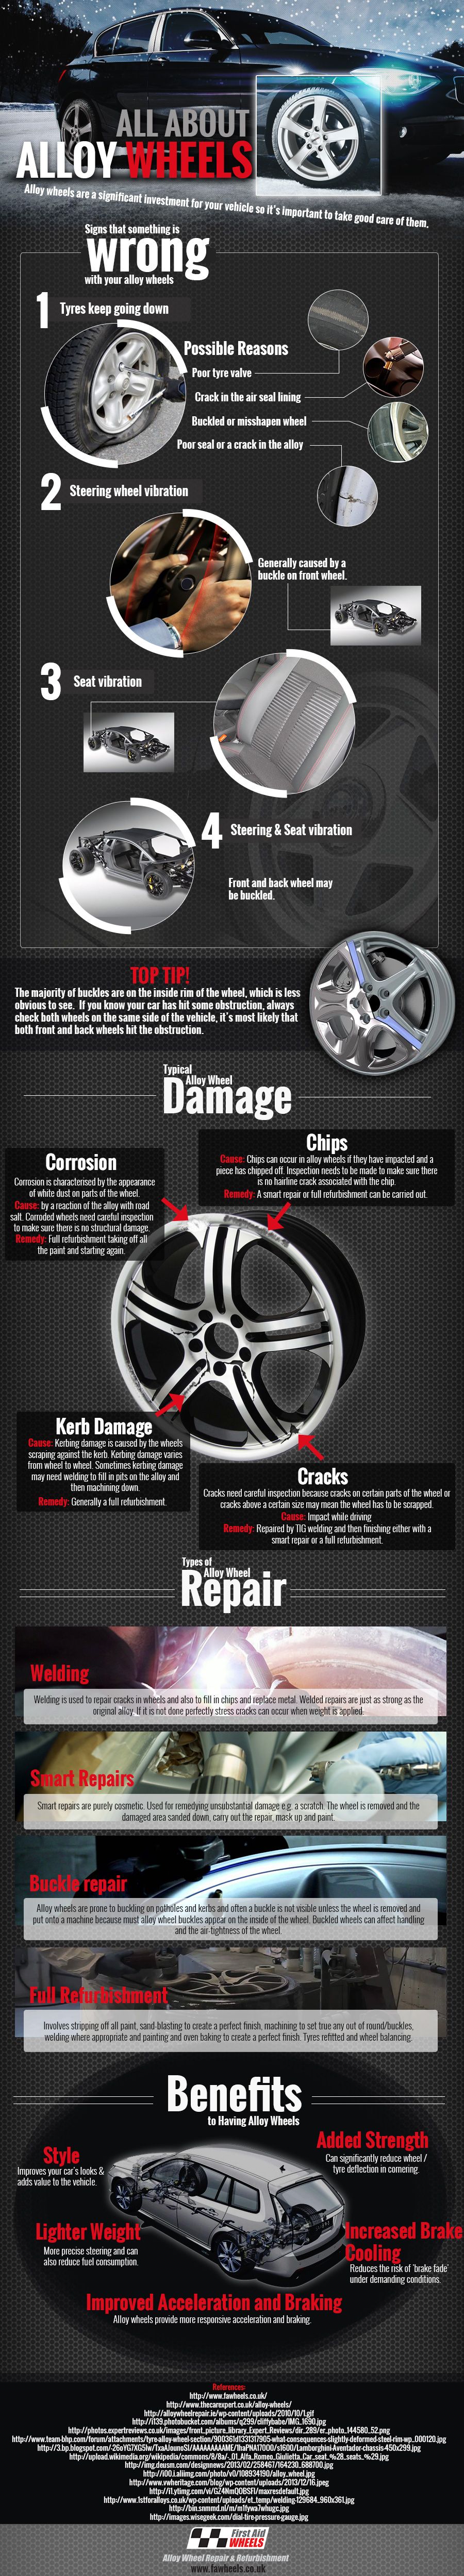 All About Alloy Wheels